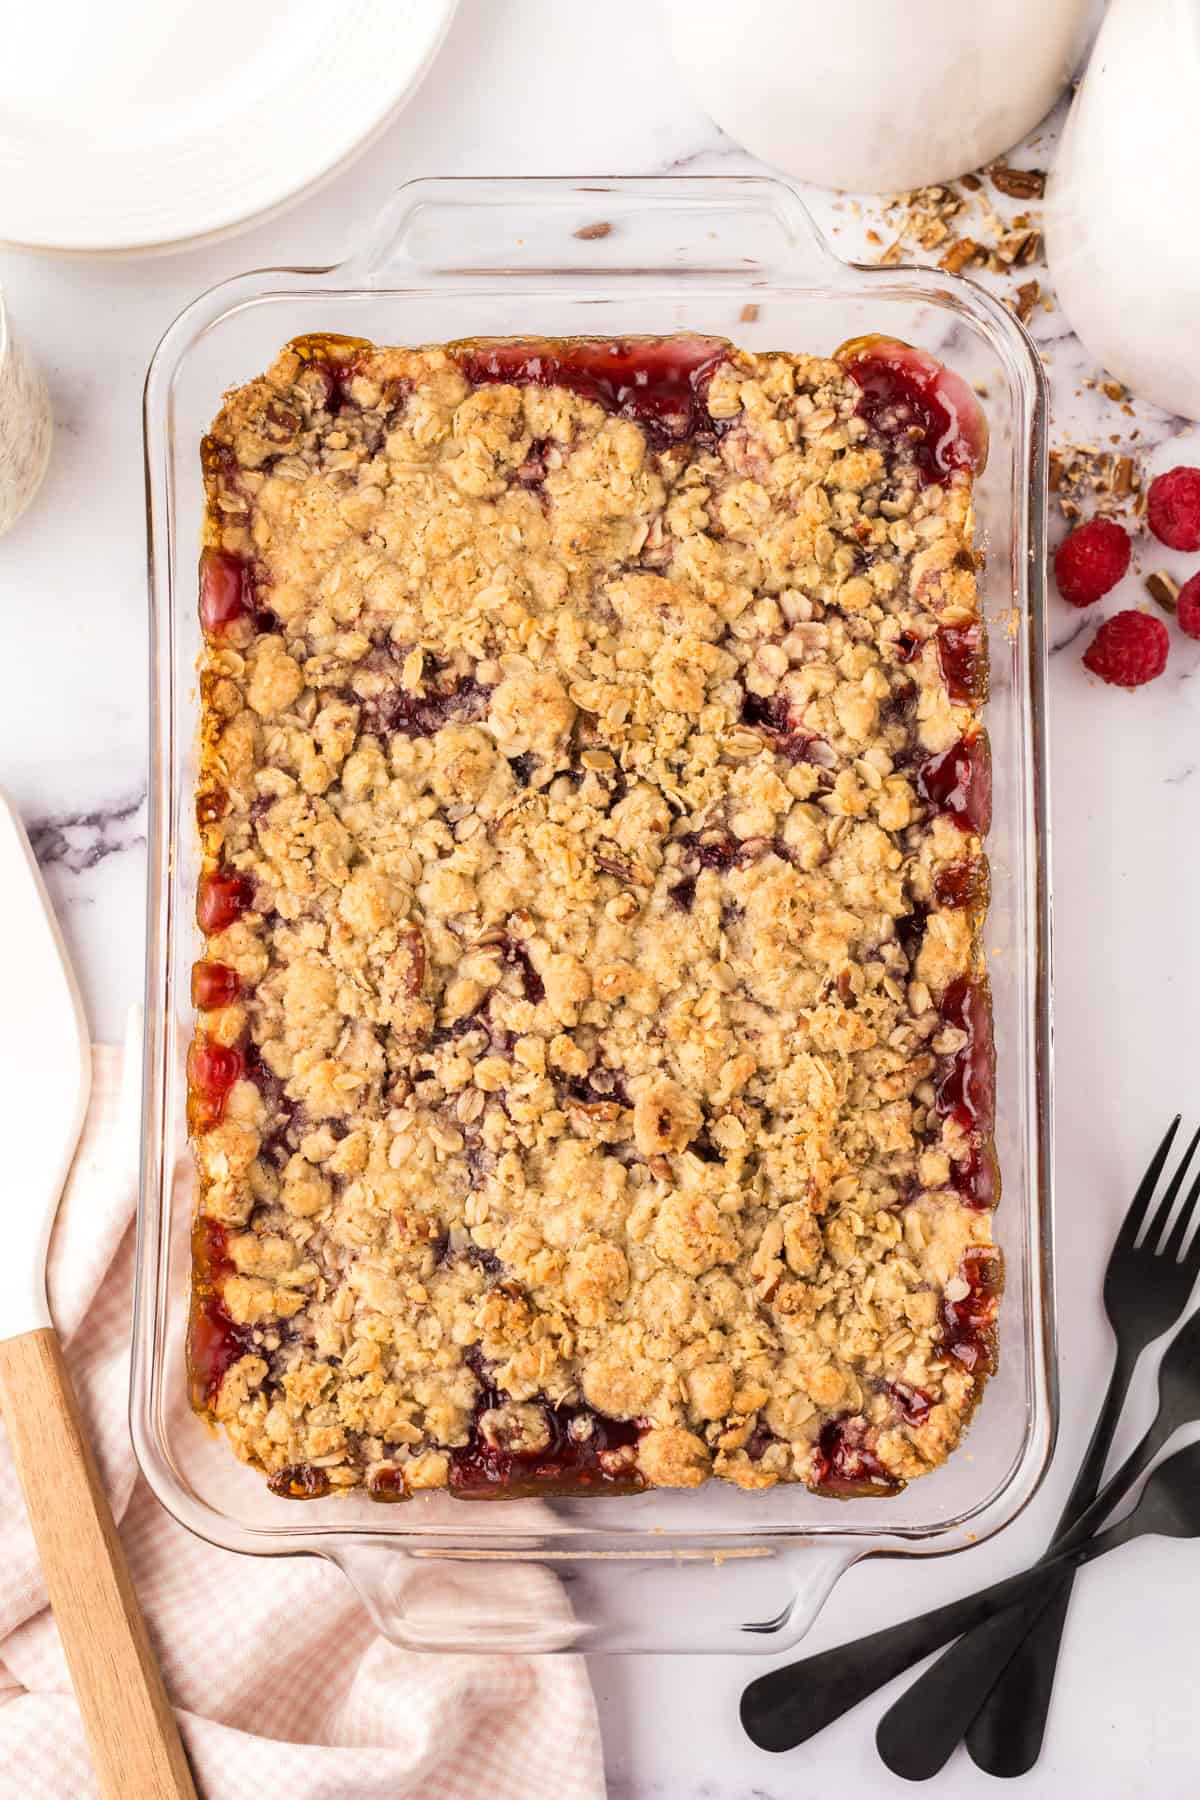 clear glass dish with raspberry streusel bars.